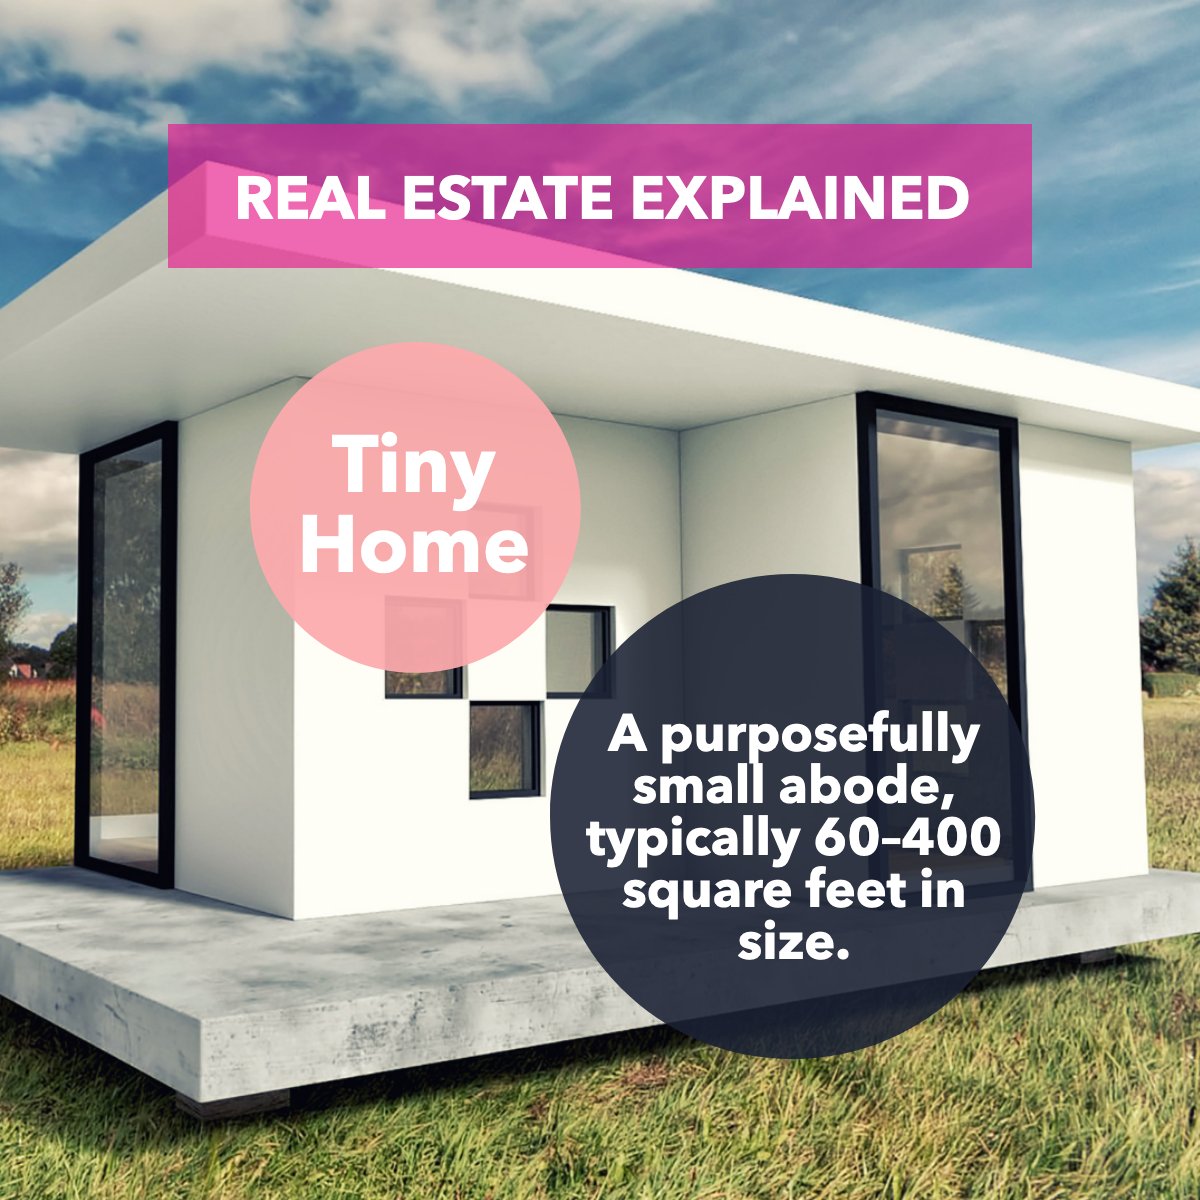 Did you know what a Tiny Home is? 🏡

Let us know below!

#tinyhomes #tinylovelyhome #tinyhomestyle 
 #realestatelife #realestate #realestatenews #HomeBuying #HomebuyingEducation #cedarrapidsiowa #homeownership #homeownershipbenefits #mattsmithteam #TheMattSmithTeam